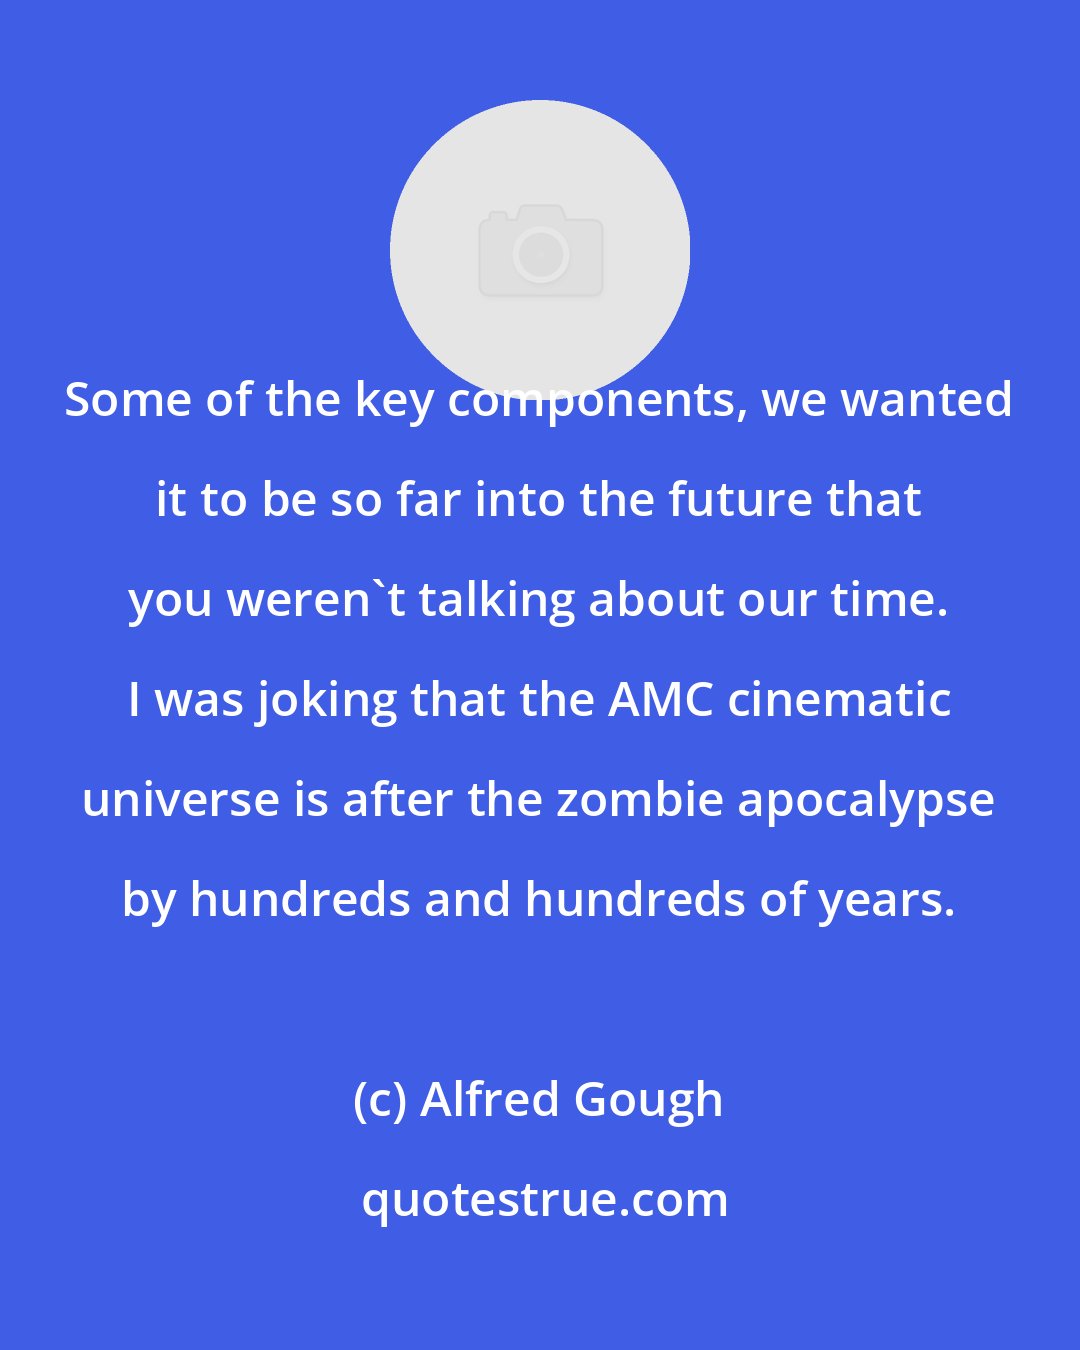 Alfred Gough: Some of the key components, we wanted it to be so far into the future that you weren't talking about our time. I was joking that the AMC cinematic universe is after the zombie apocalypse by hundreds and hundreds of years.